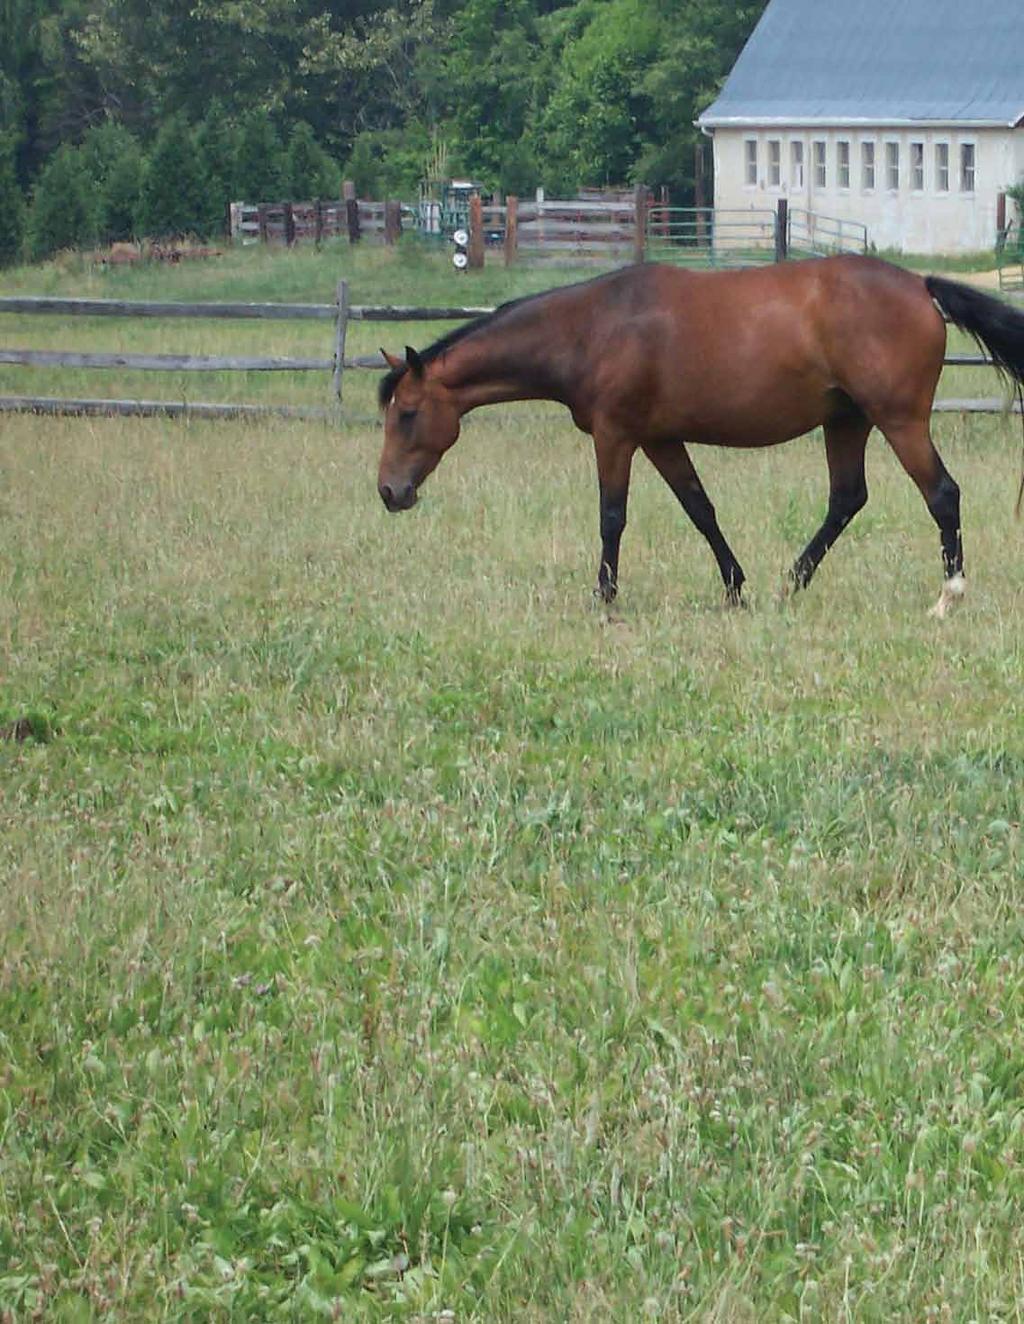 Horse Forage & Pasture When making your decision, vigor and persistence are characteristics you want from your forage seed. Choose forages adapted to your climate and soil.